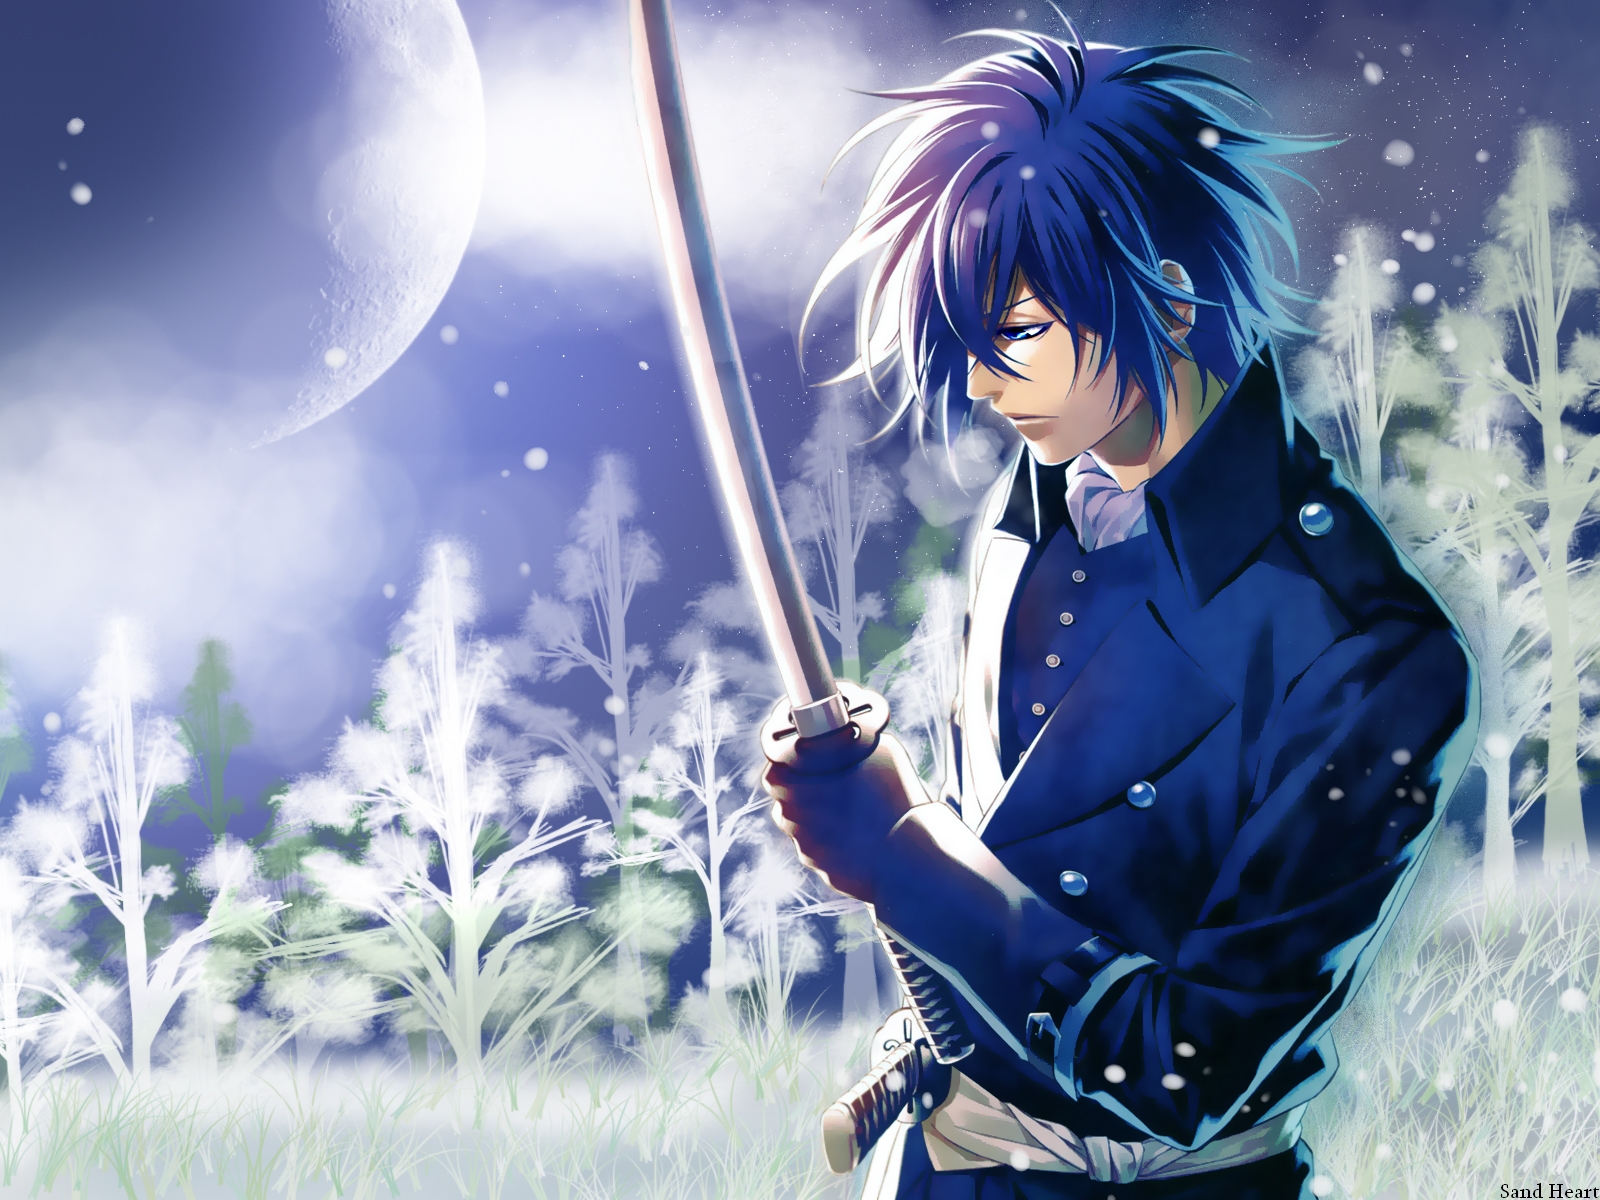 Sword Anime Guy With Blue Hair - 1600x1200 Wallpaper 